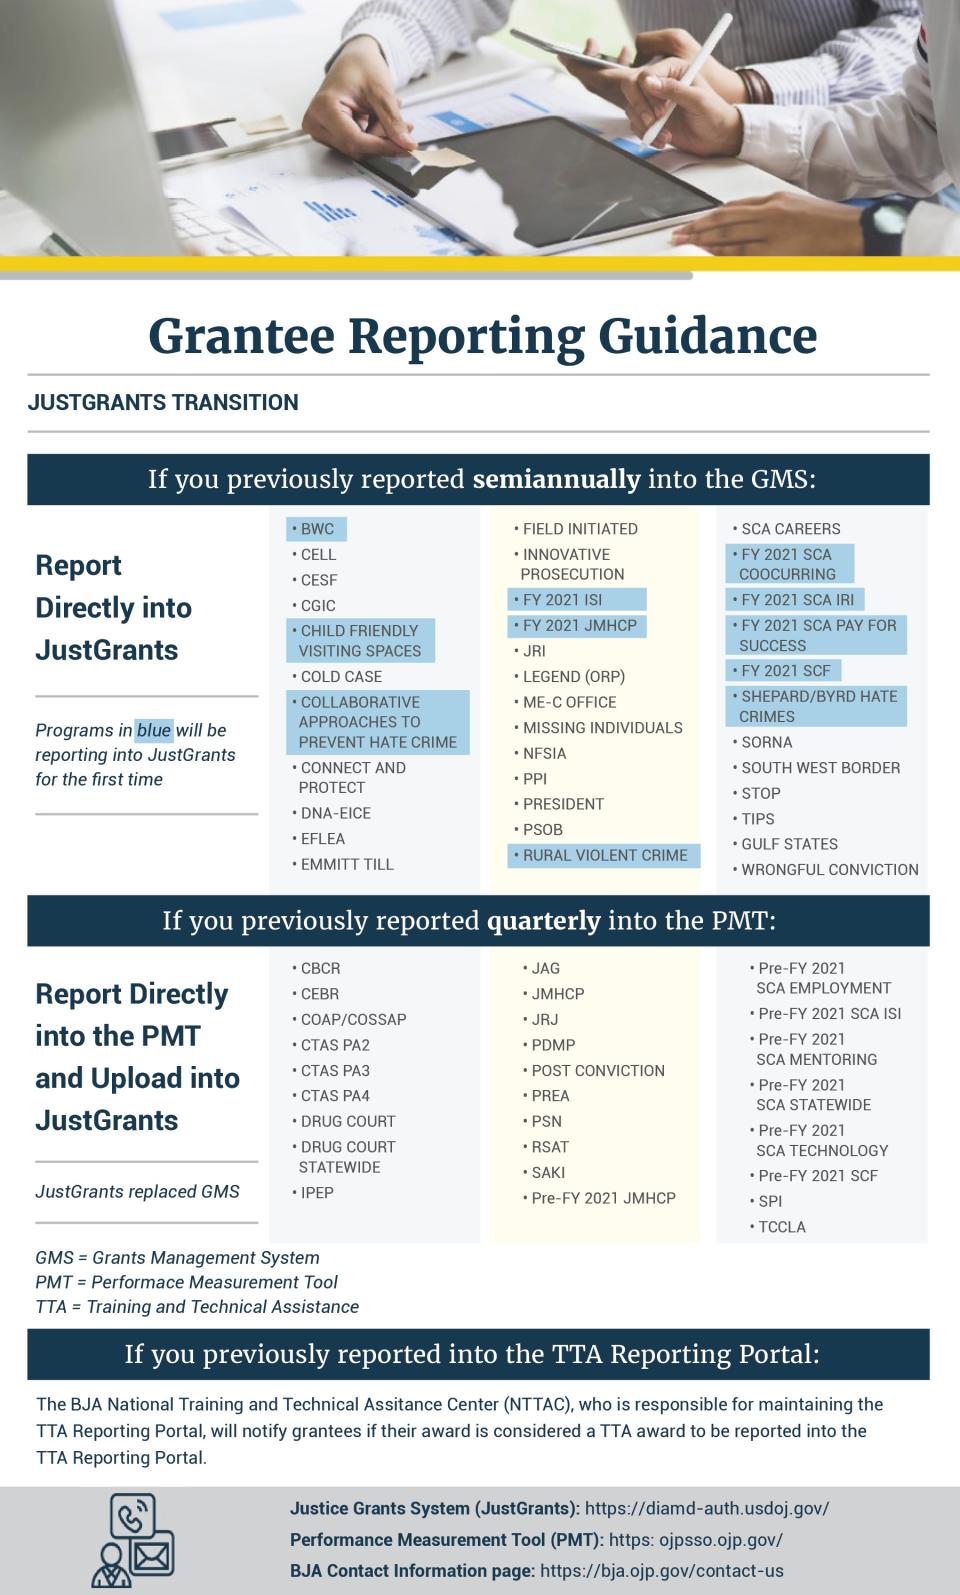 Guidance on how and where to report performance measurement data